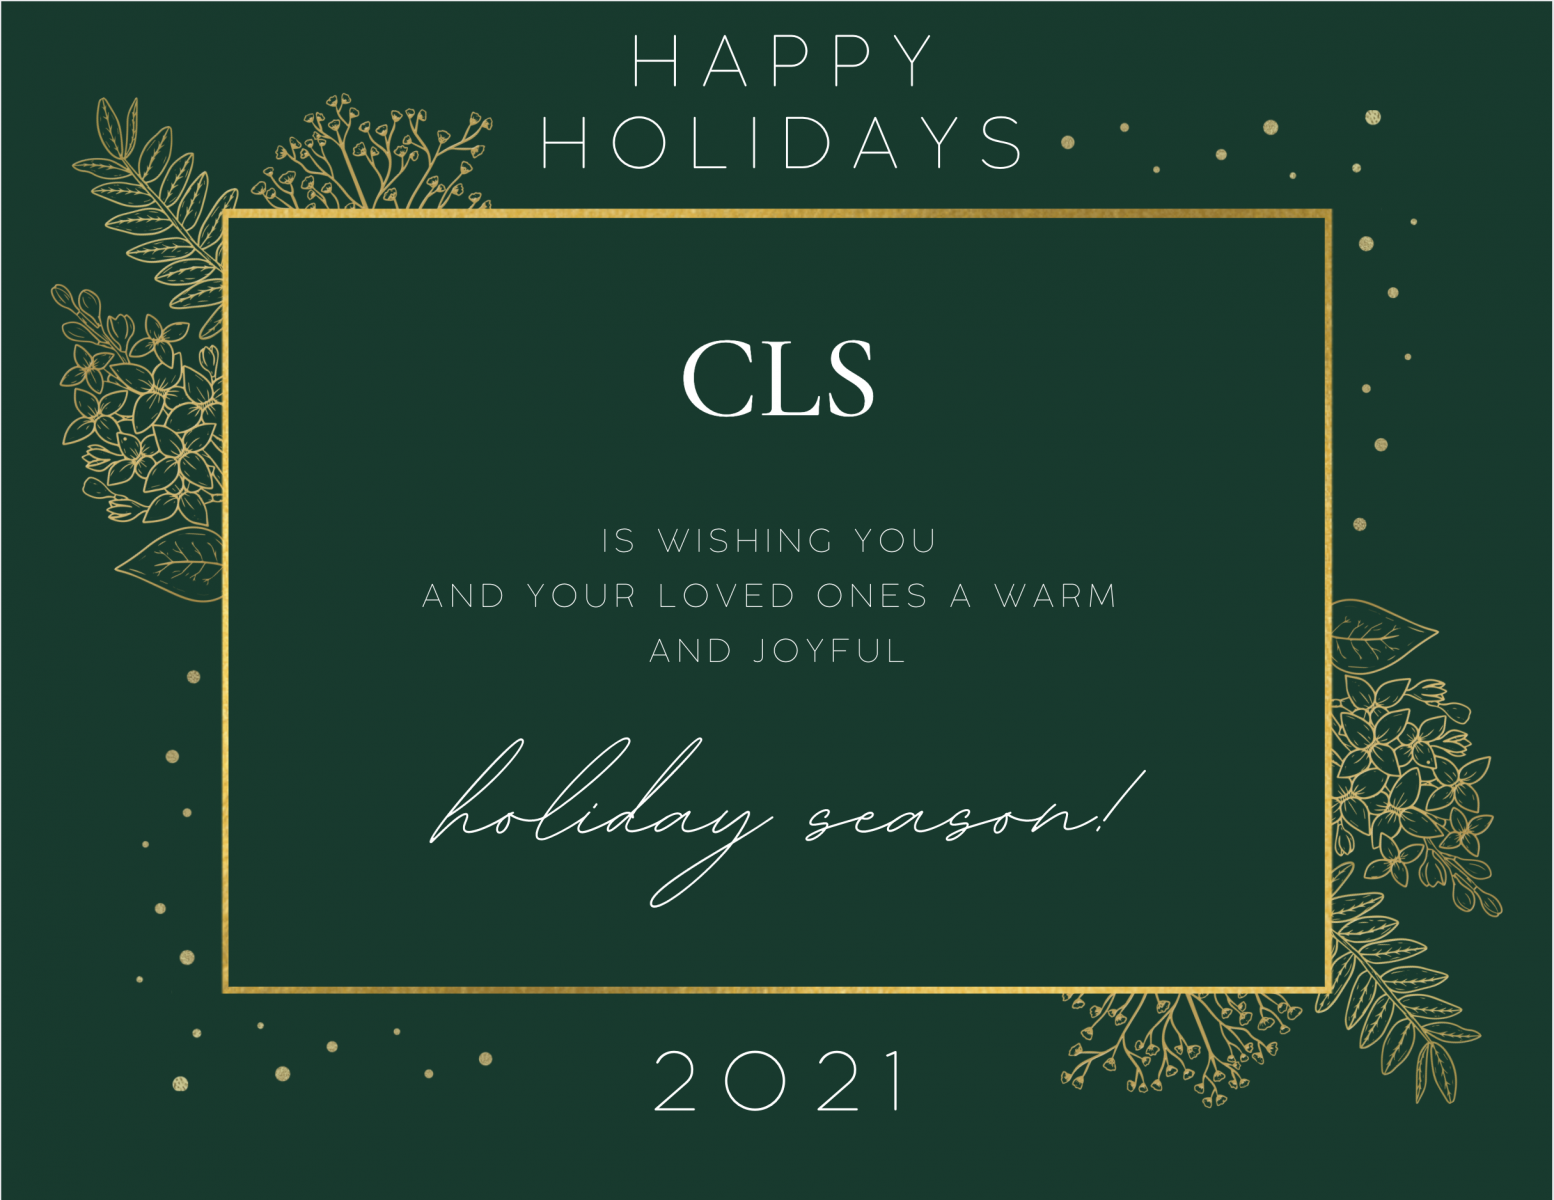 Happy Holidays card green with emellishments saying&quot; CLS is wishing you and your loved ones a warm and joyful holiday season!&quot;